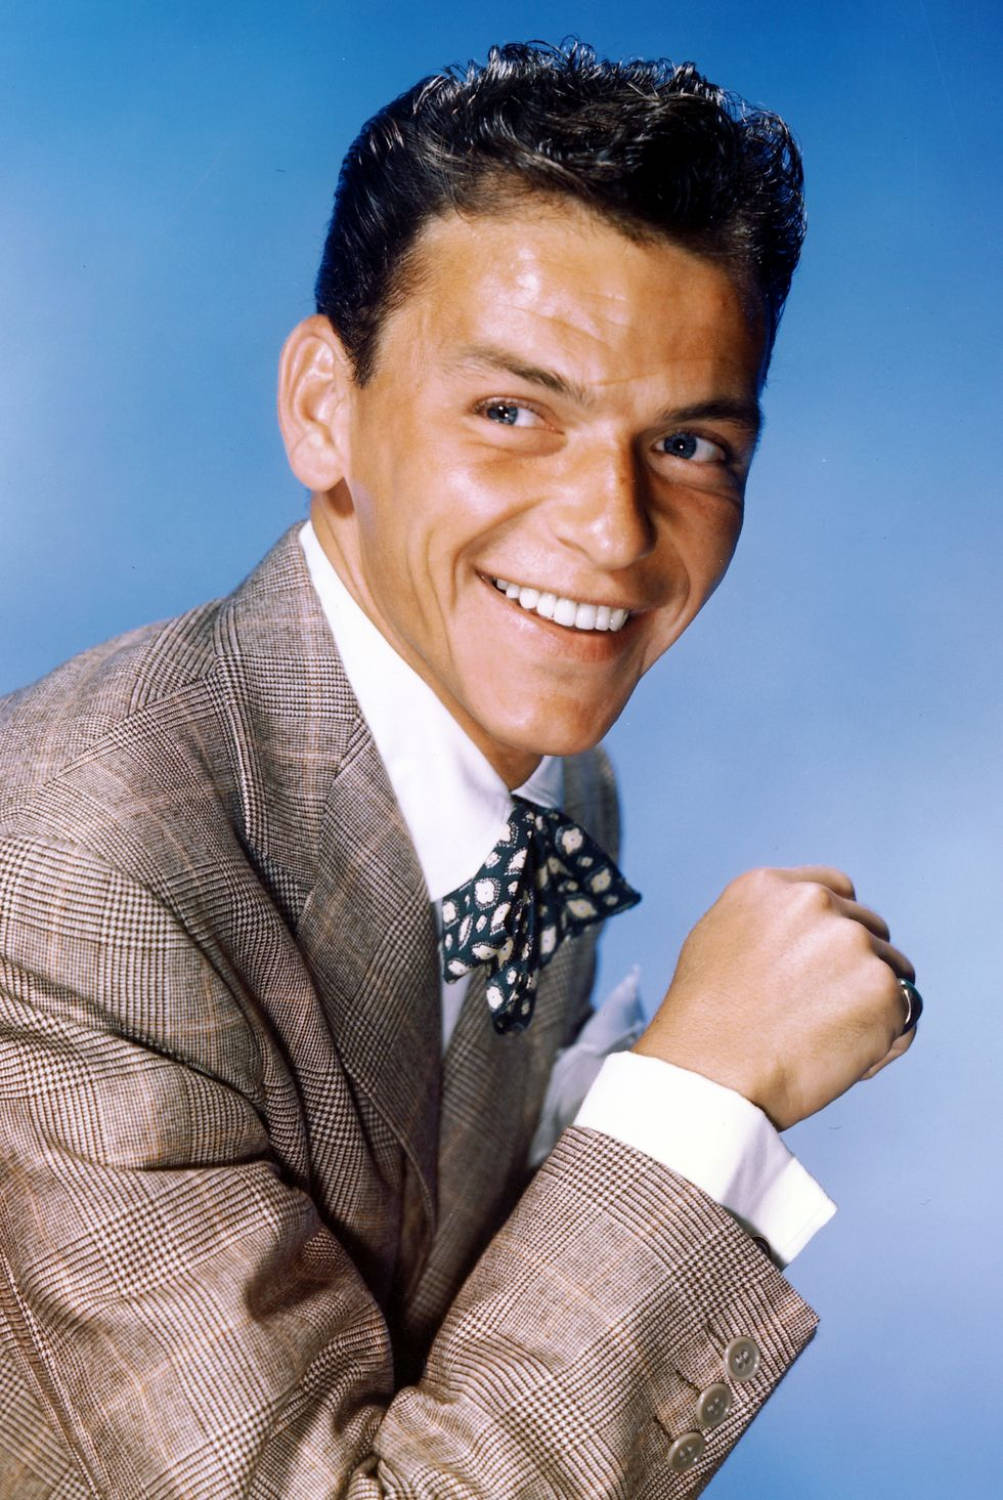 Frank Sinatra Fully Colored Photograph Wallpaper